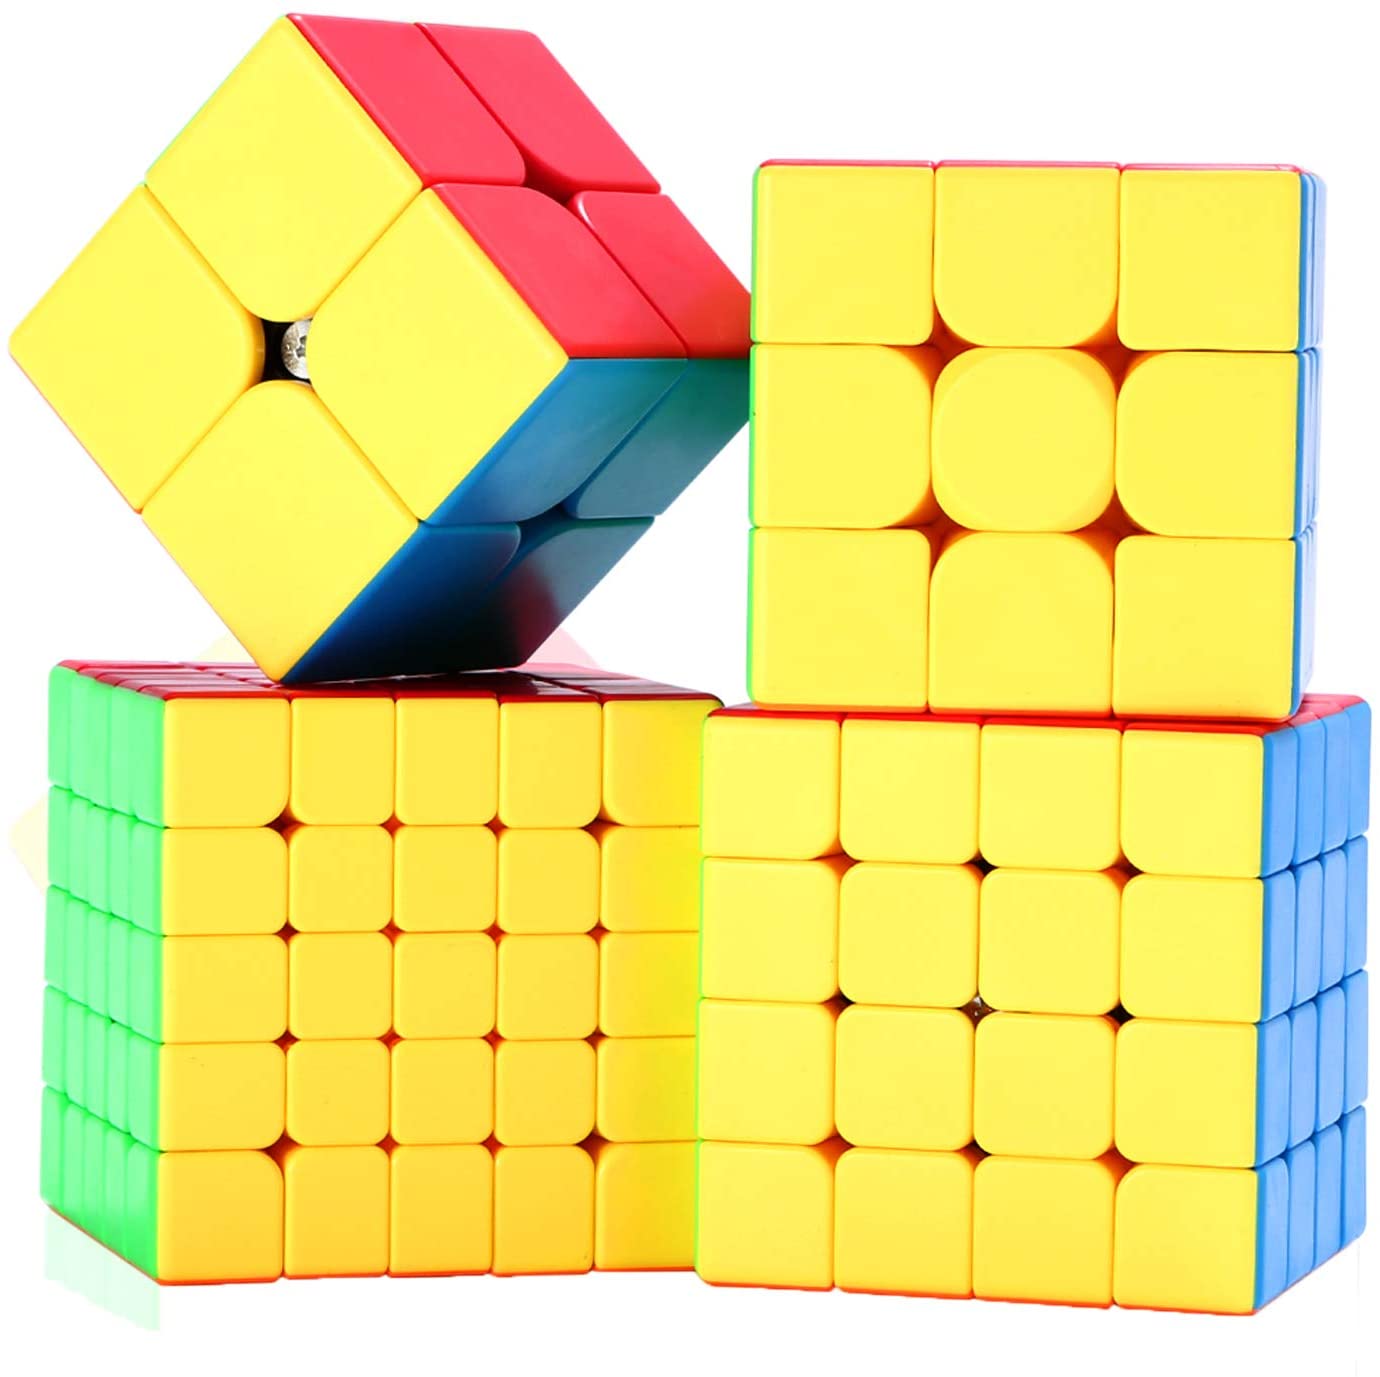 Roxenda Cube Bundle 2x2 3x3 4x4 5x5 Stickerless Bright Magic Cube Cubing Classroom Smooth Puzzles Cube Set With Gift Packing Roxenda - rabdoms models 2 rubiks cube roblox